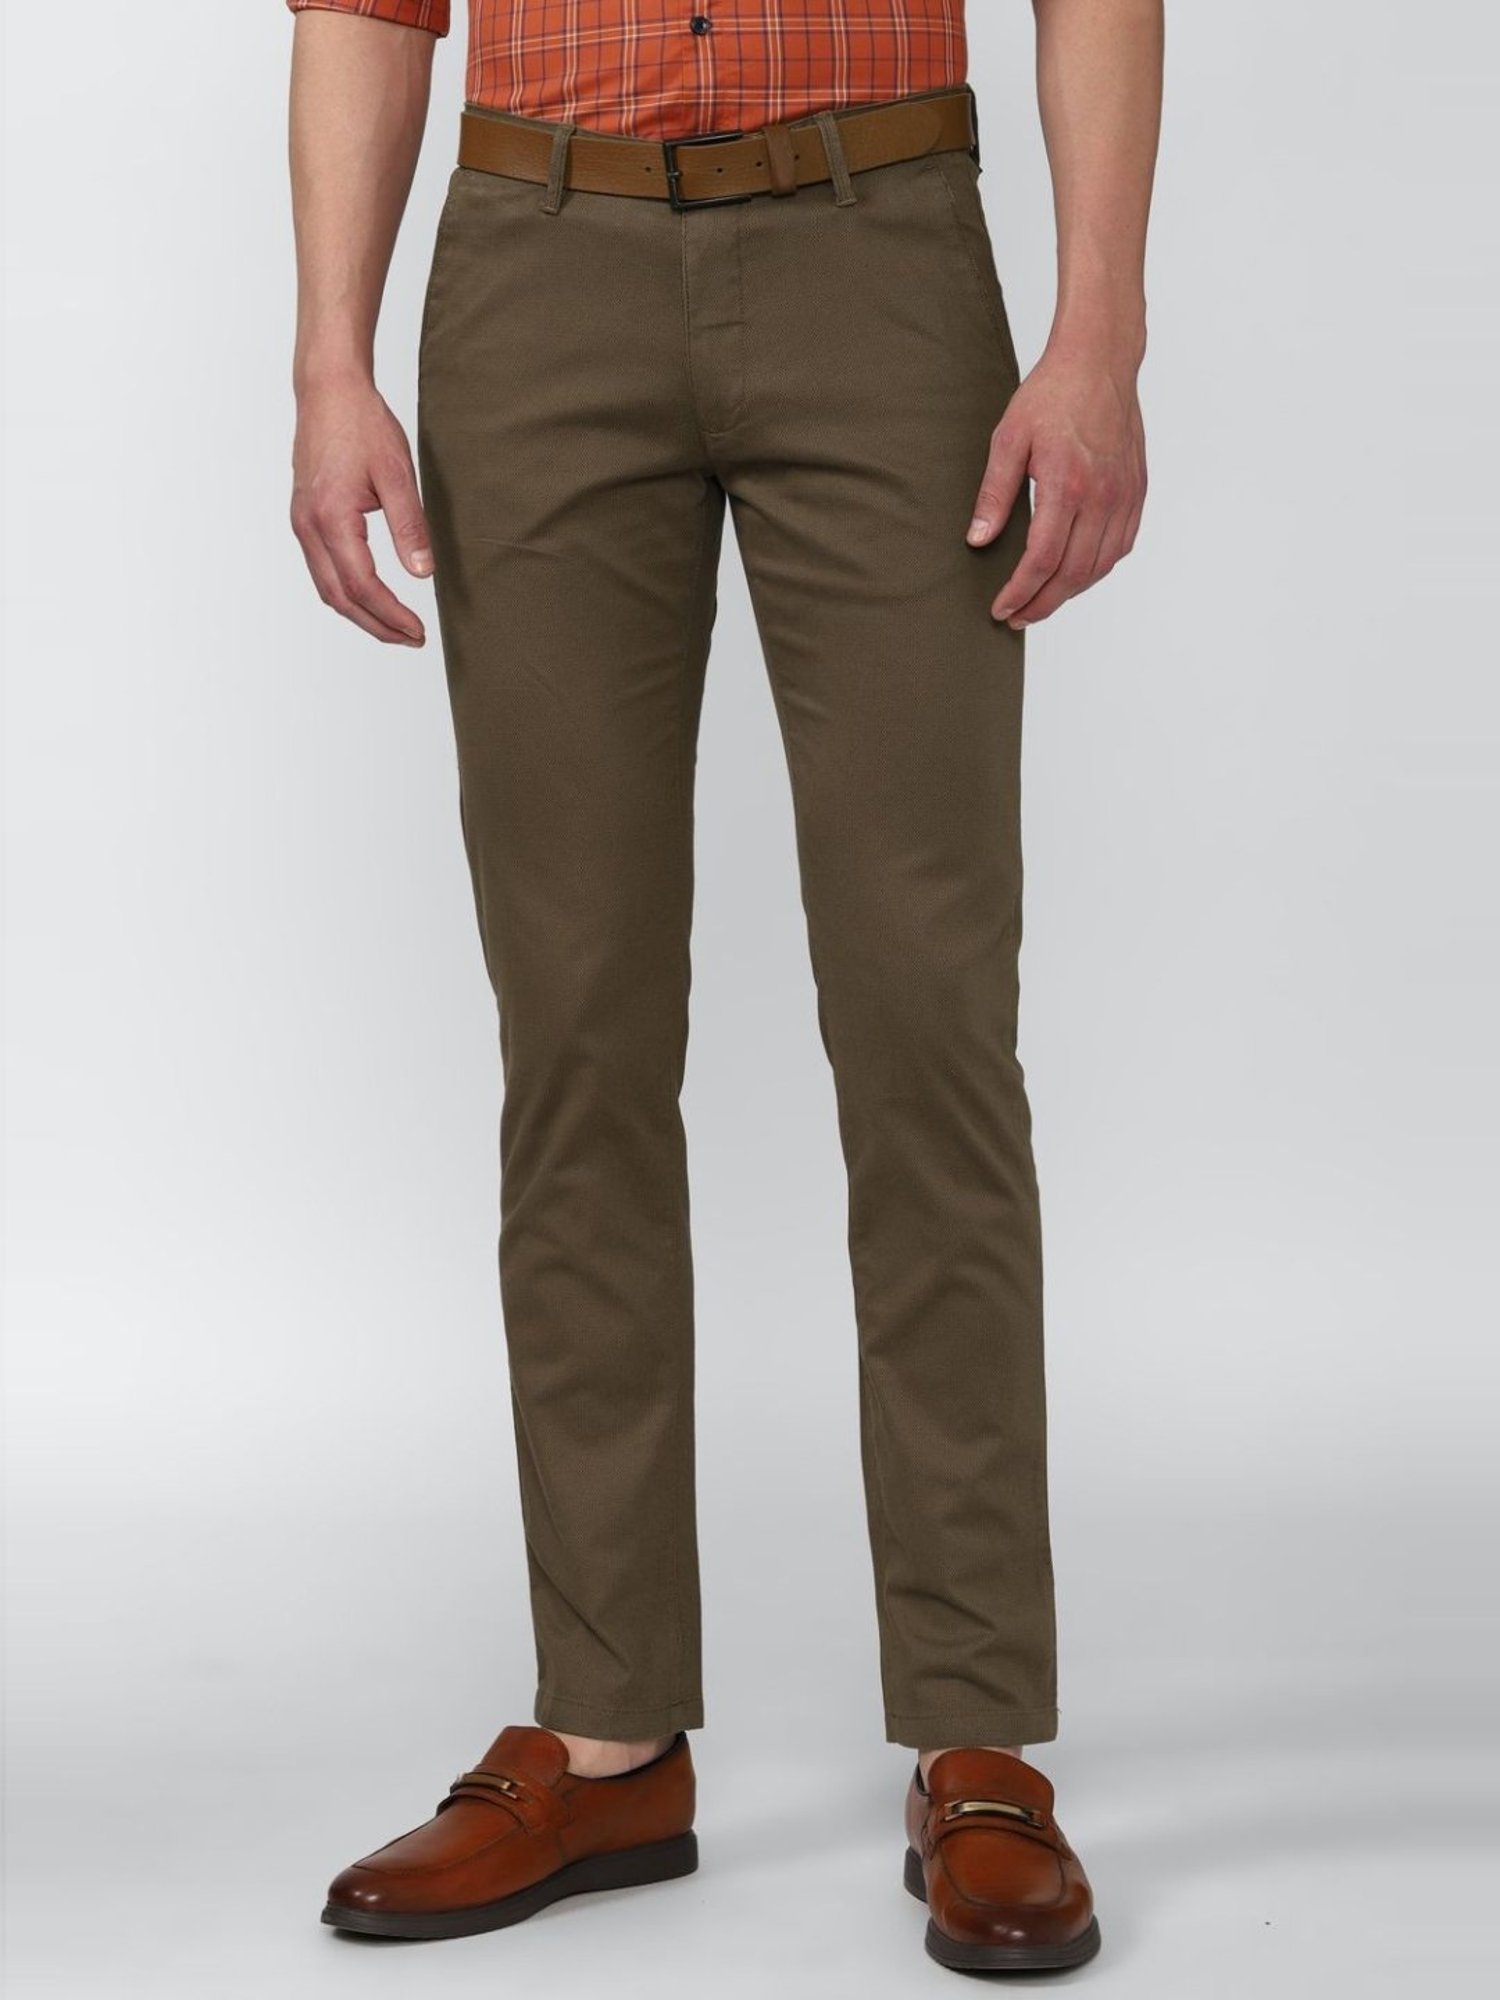 Casual Trousers in Light Khaki colour  urban clothing co